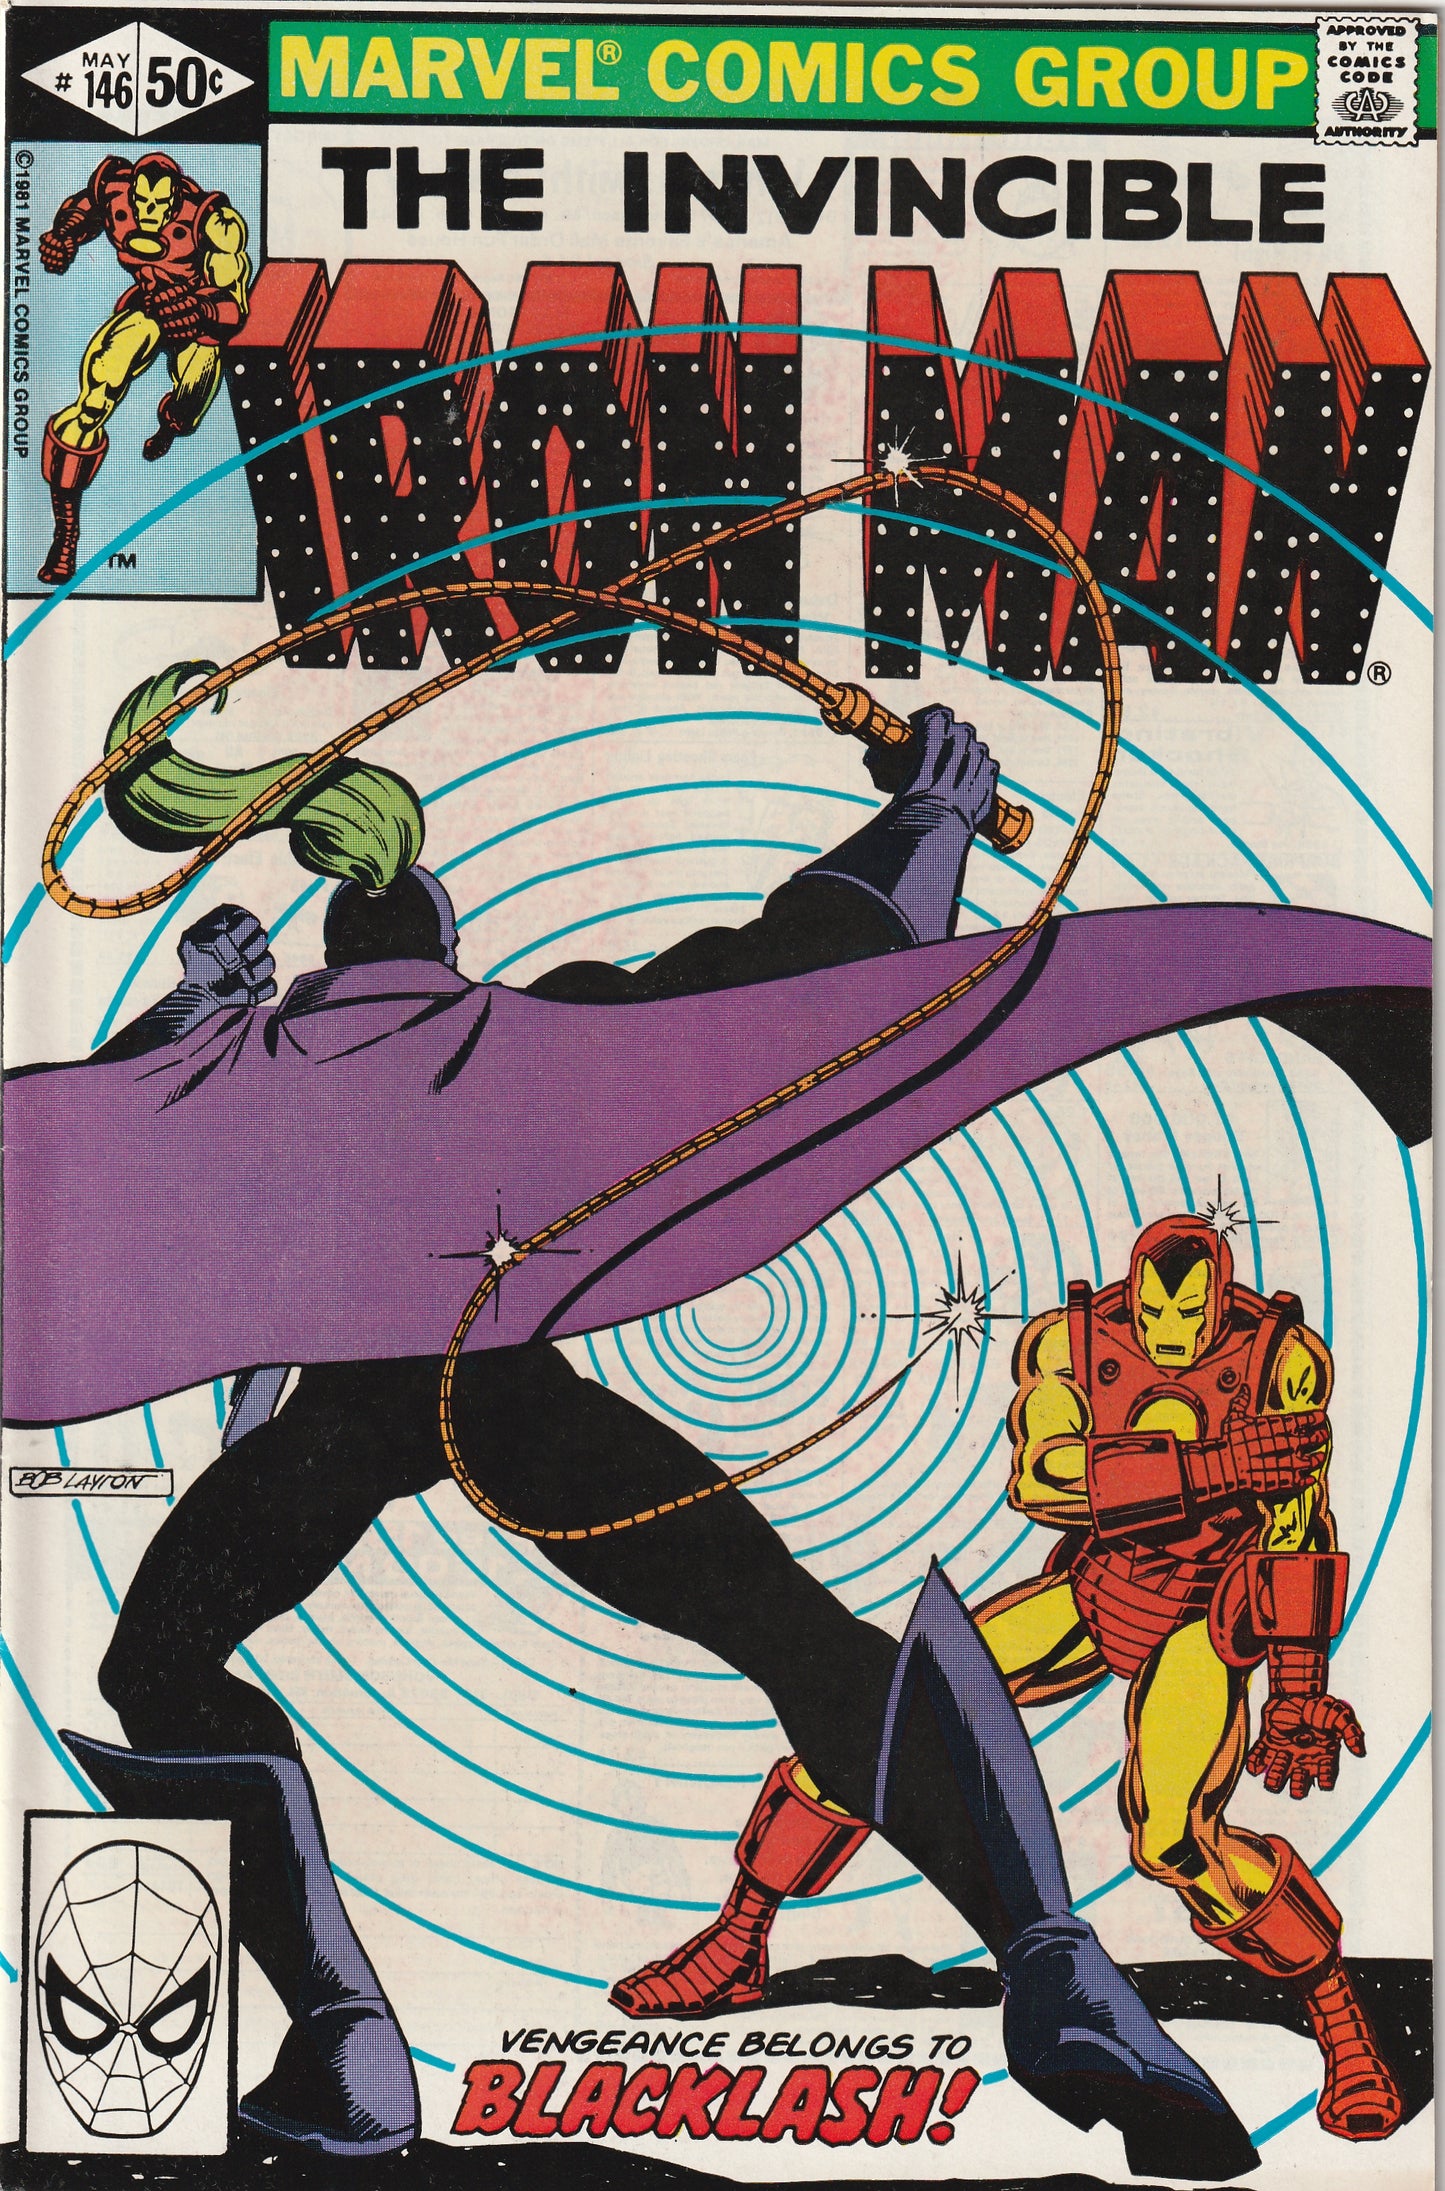 Iron Man #146 (1981) - 1st appearance of Mark Scariotti as Backlash